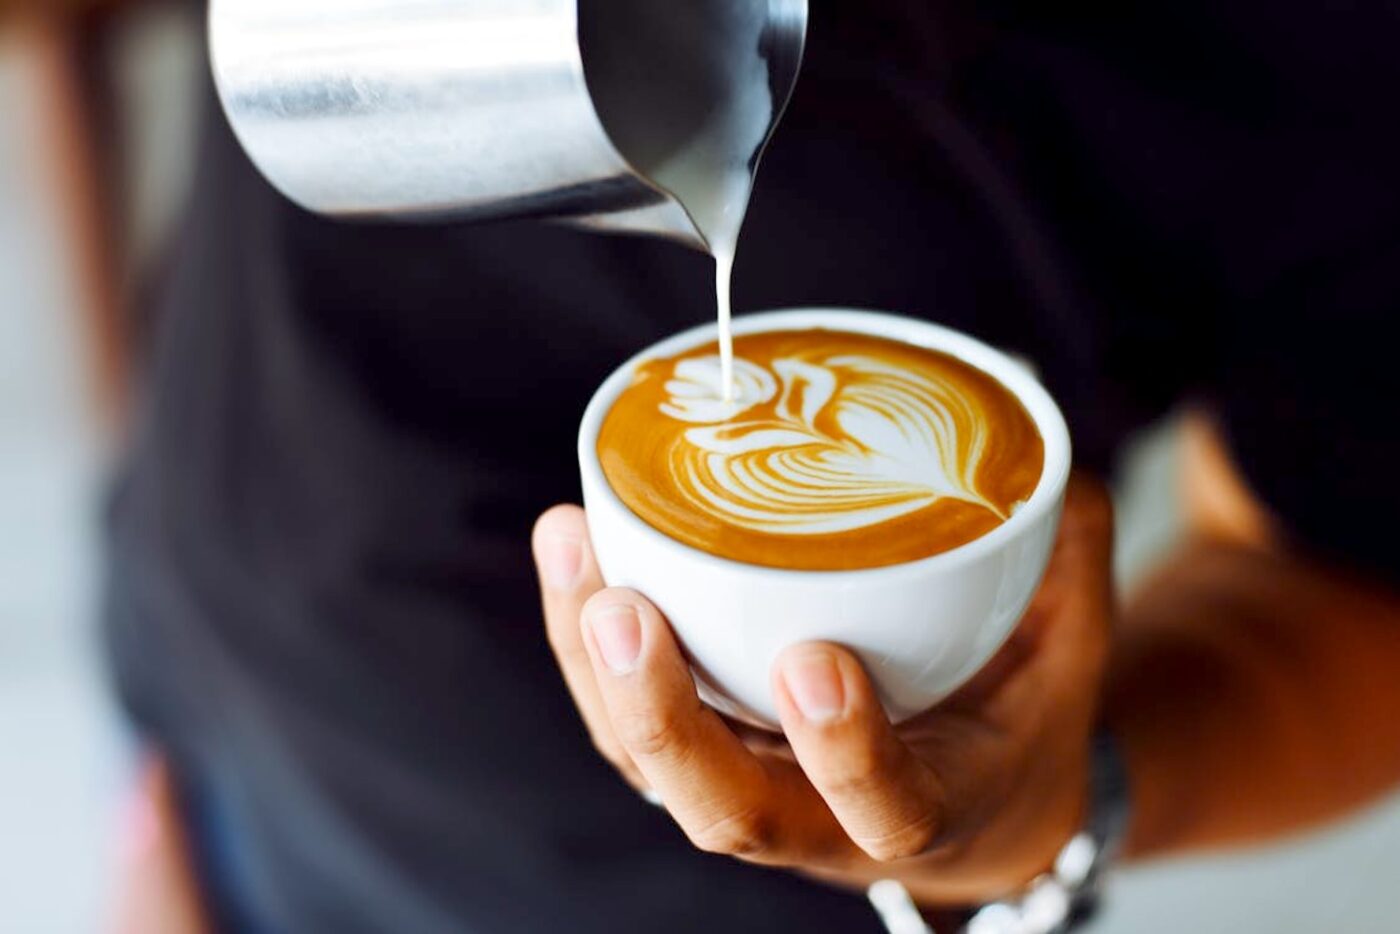 Aussies Rage Over Rising Cost Of Coffee, But They’ve No Right To Be Upset